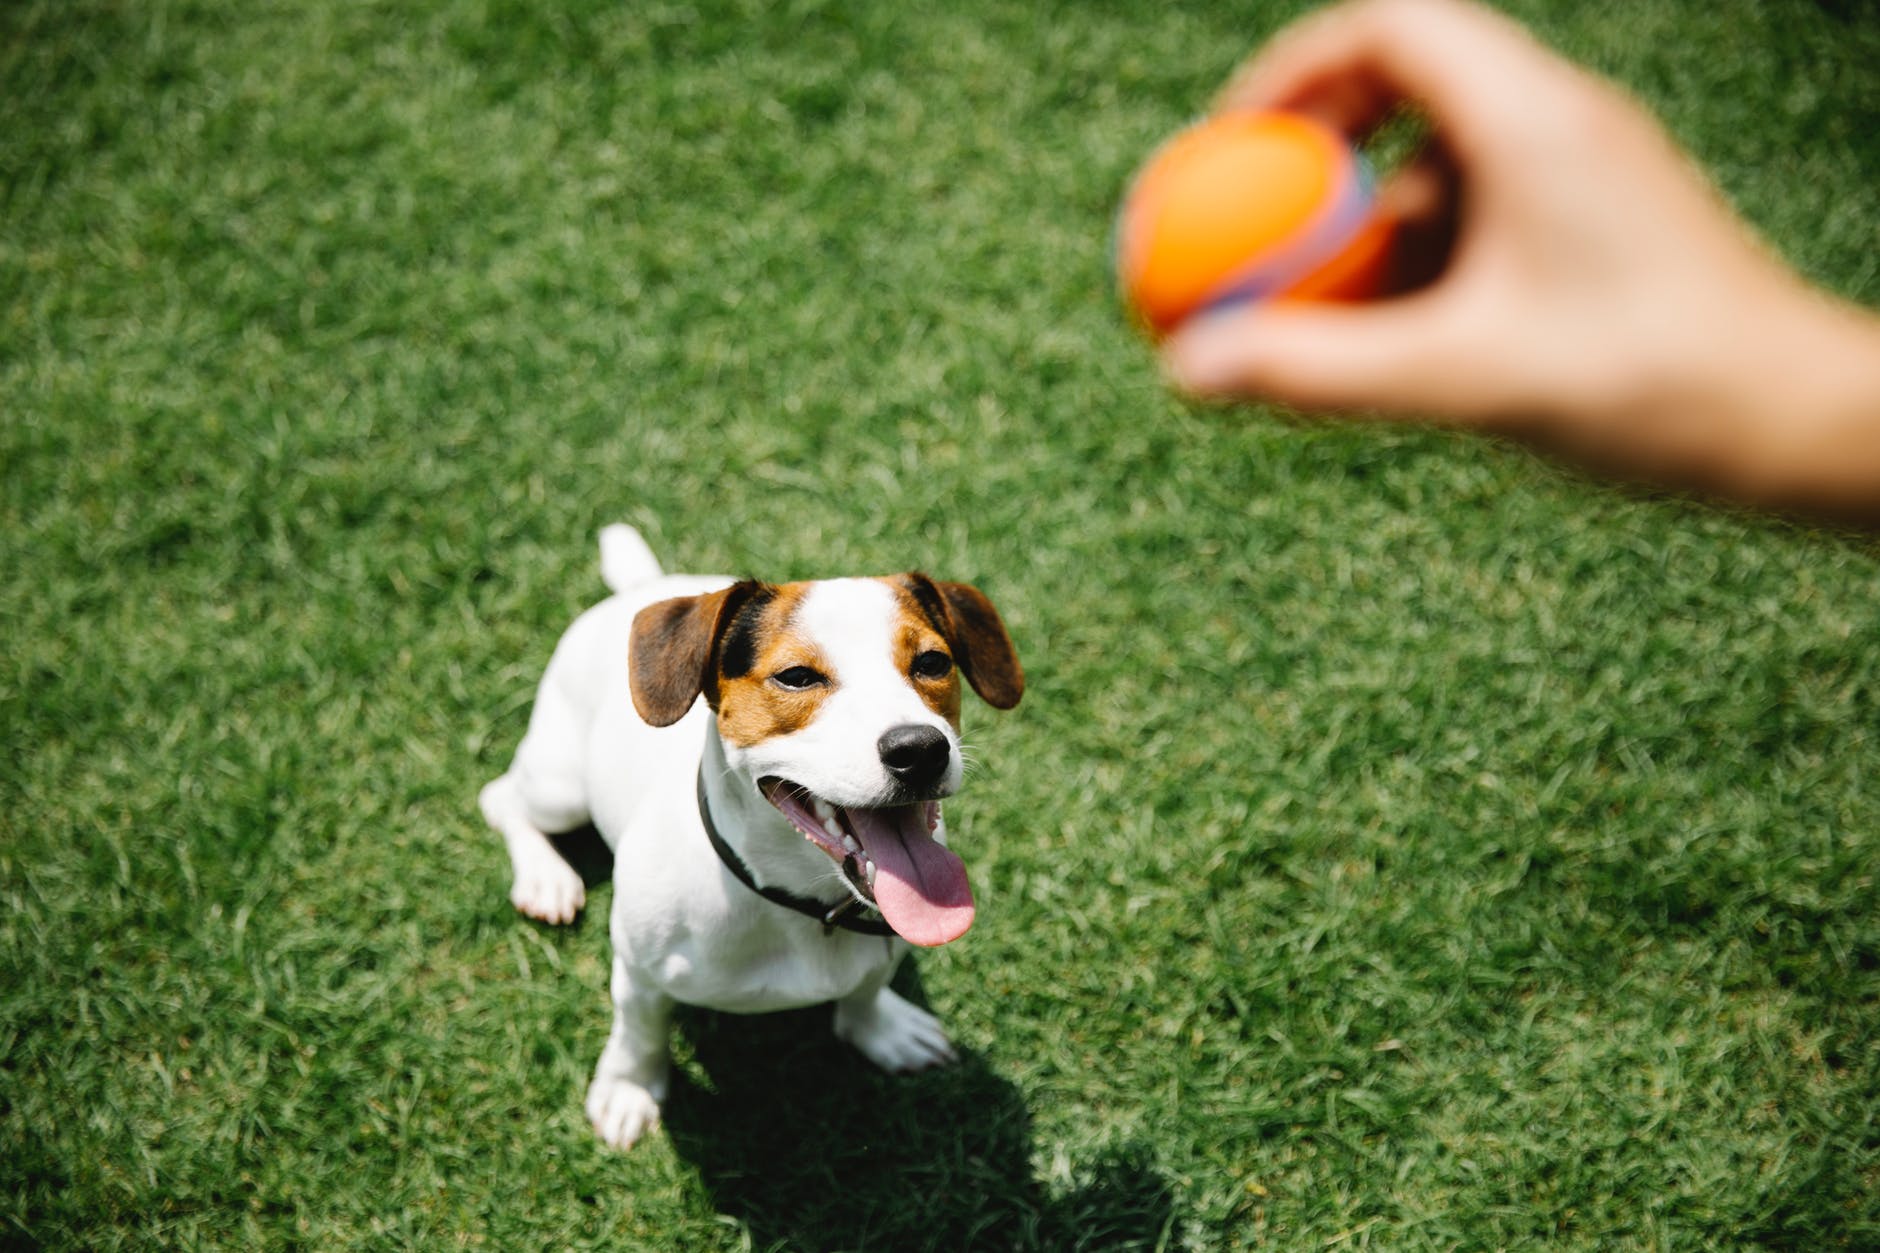 a dog on a lawn and the hand of its owner holding a ball